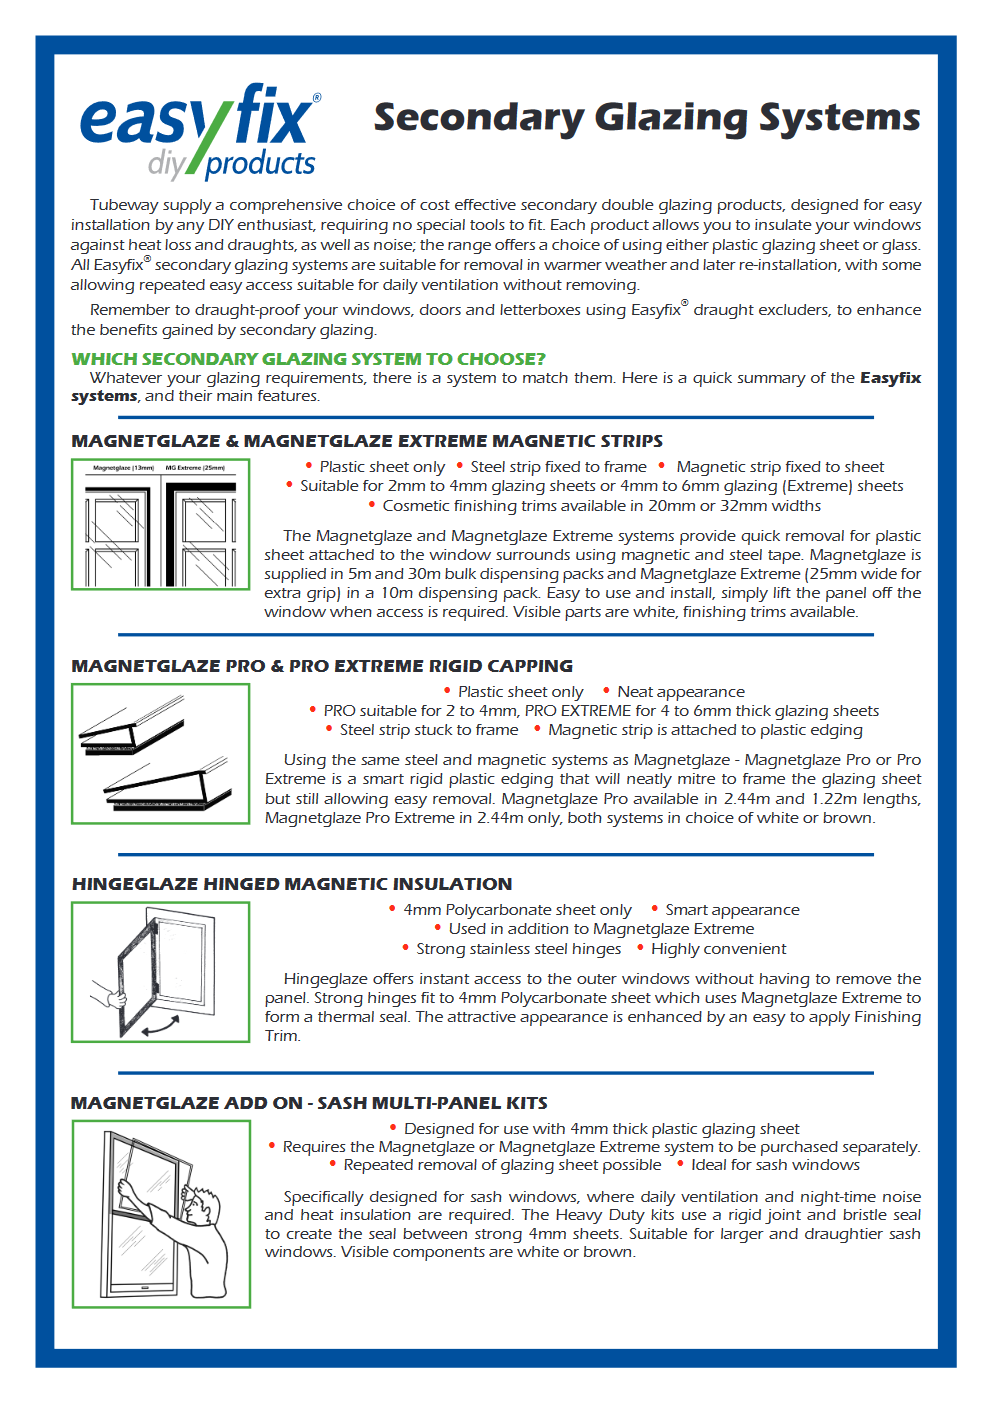 Secondary Glazing Systems Overview